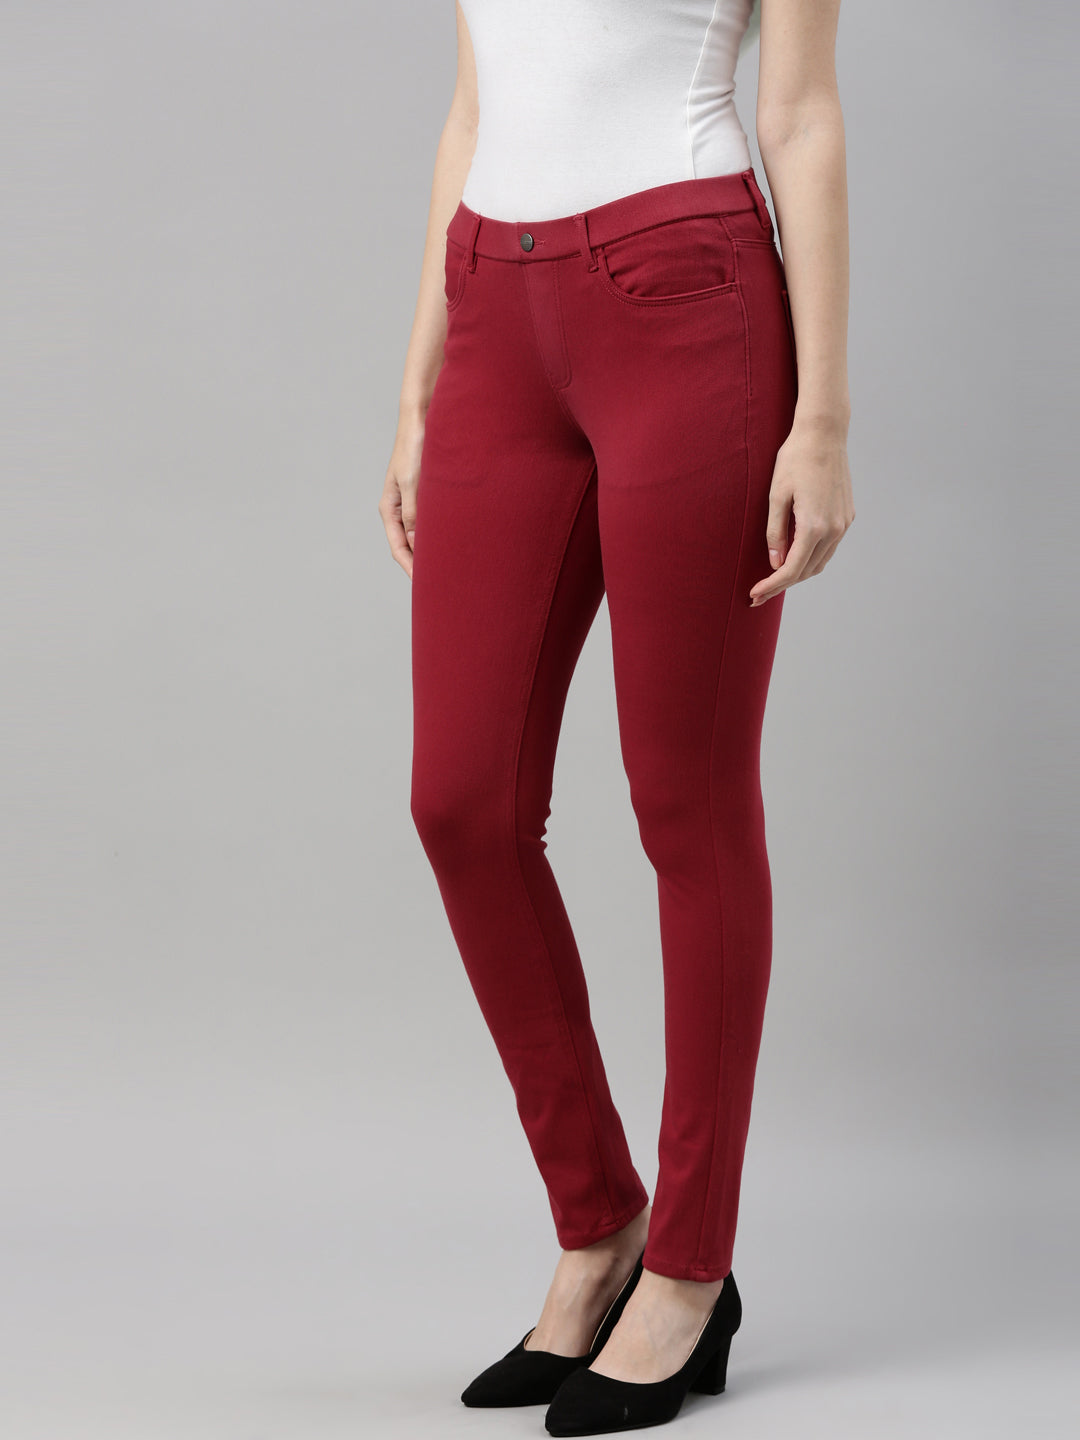 Buy woolen jeggings for womens combo in India @ Limeroad